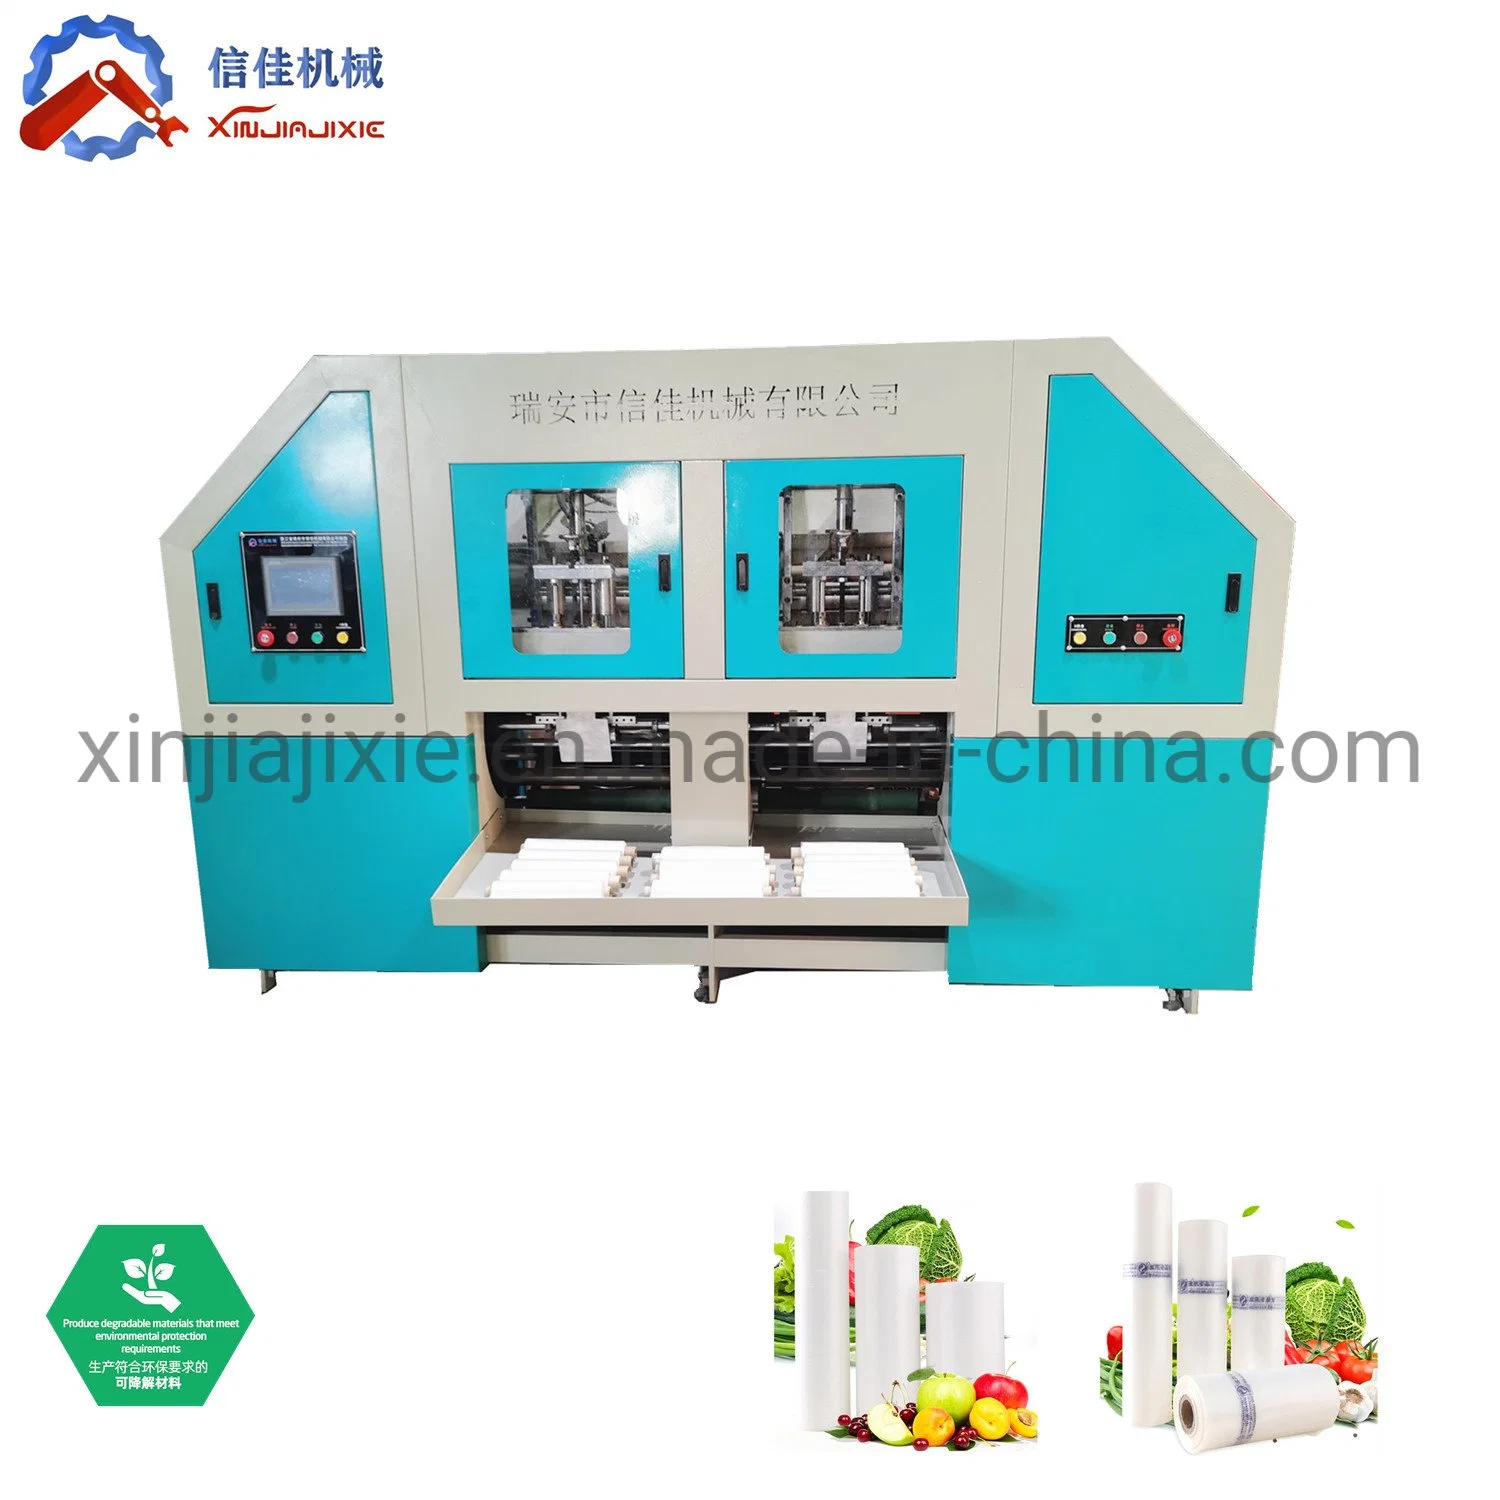 Fully Automatic HDPE LDPE Shopping Rolling Plastic Bag Making Machine Price with Automatic Roll Change